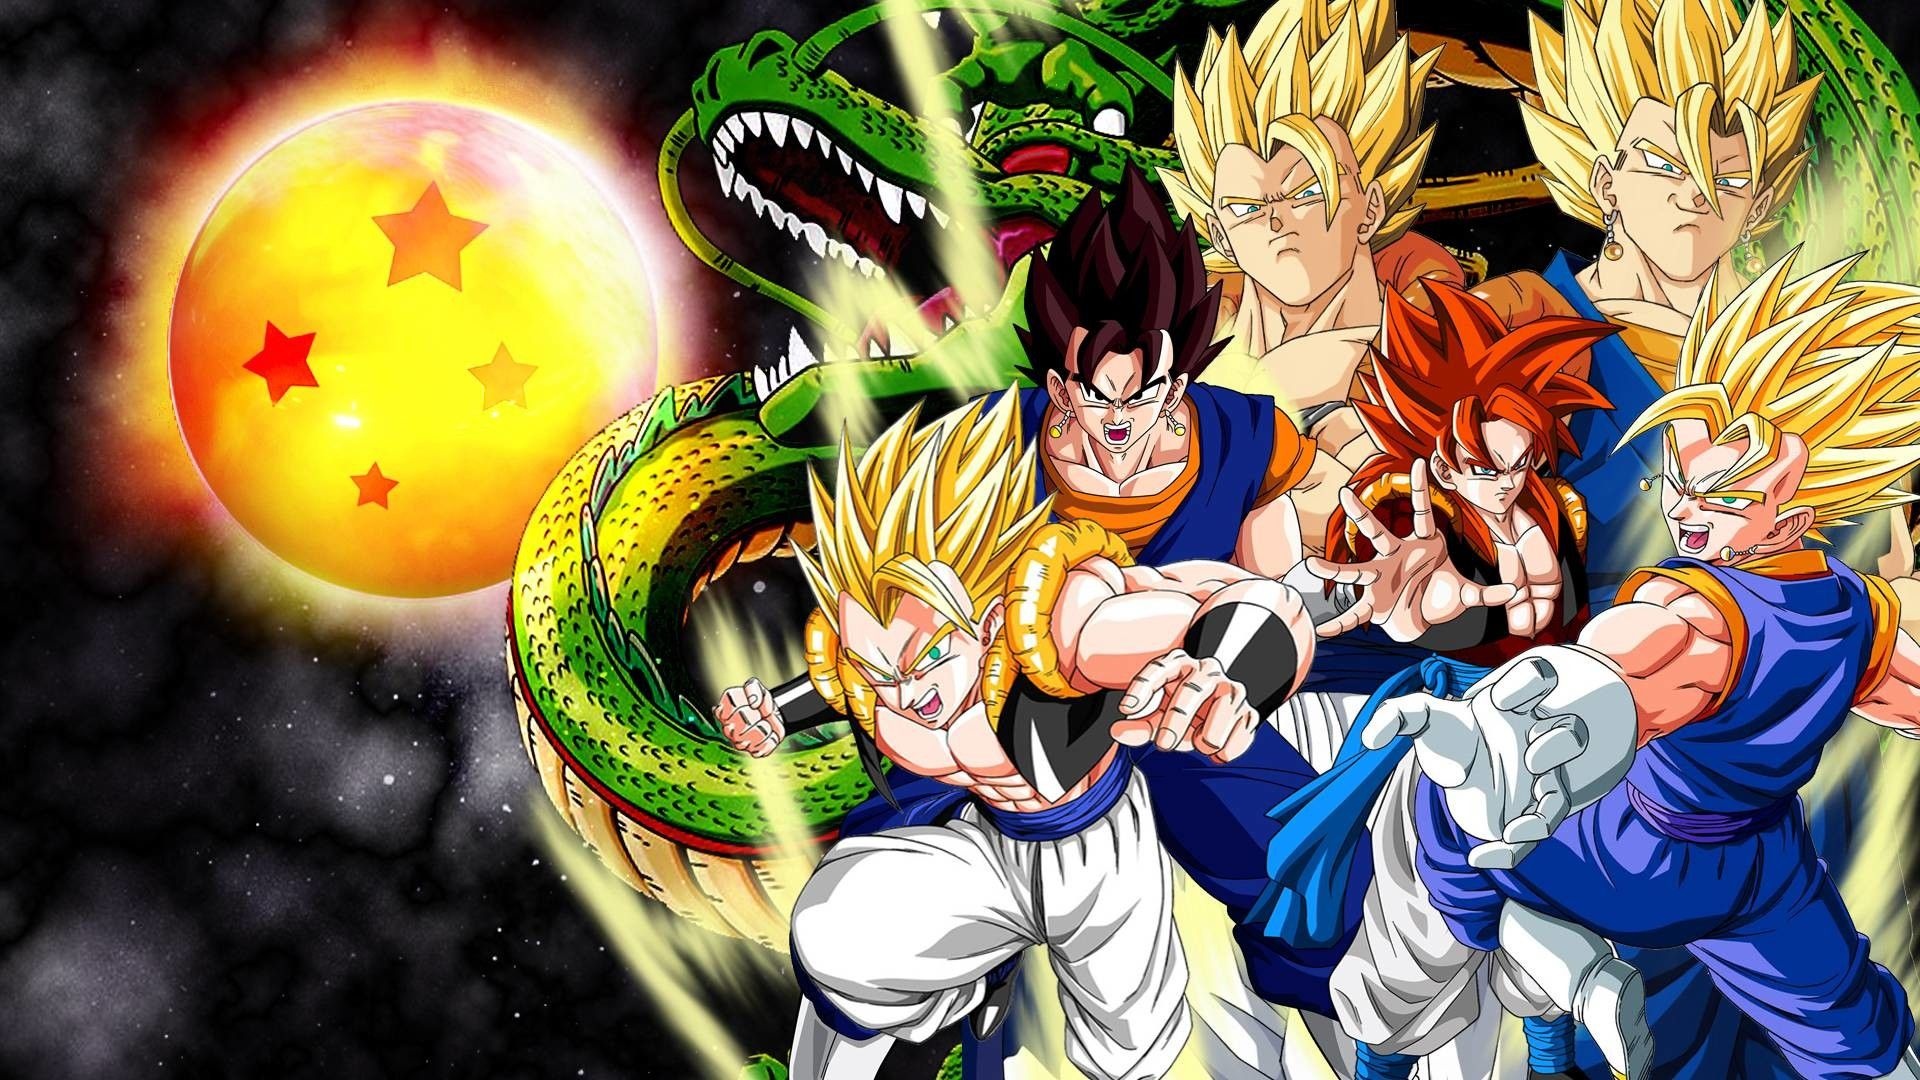 Dragon Ball Z Live Wallpaper Pc posted by Zoey Sellers 1920x1080